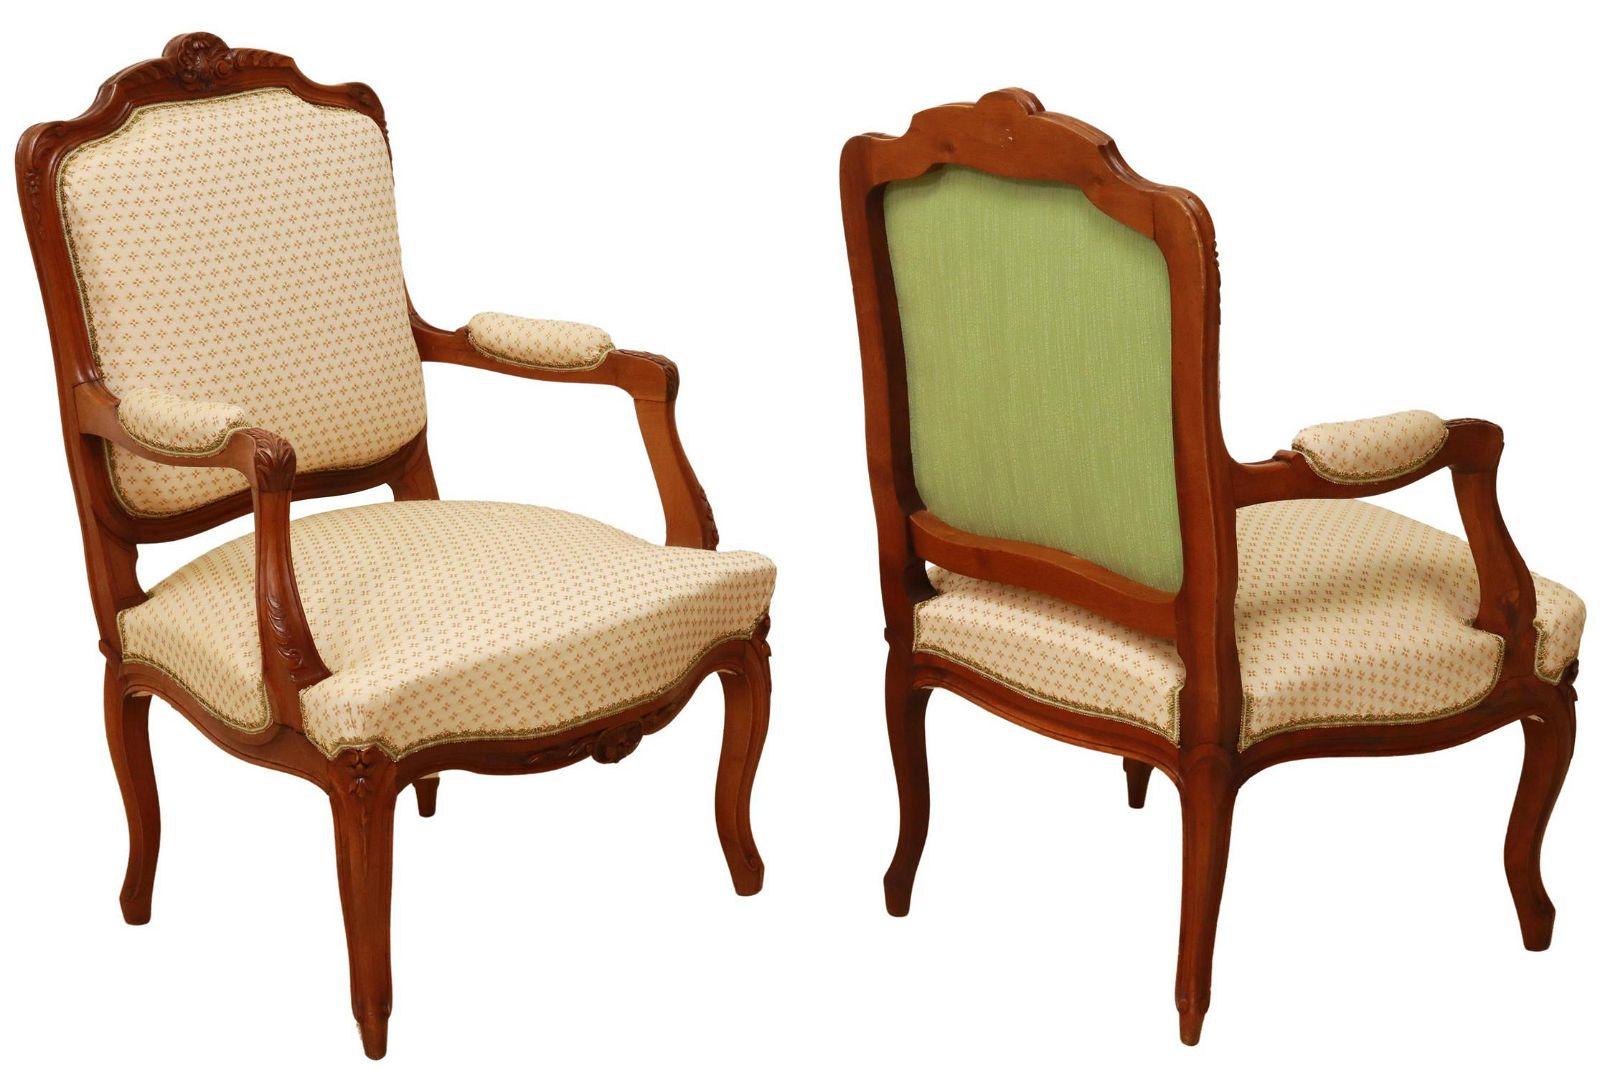 Hand-Crafted French Louis XV Style Upholstered Fauteuils Arm Chairs, a Pair For Sale